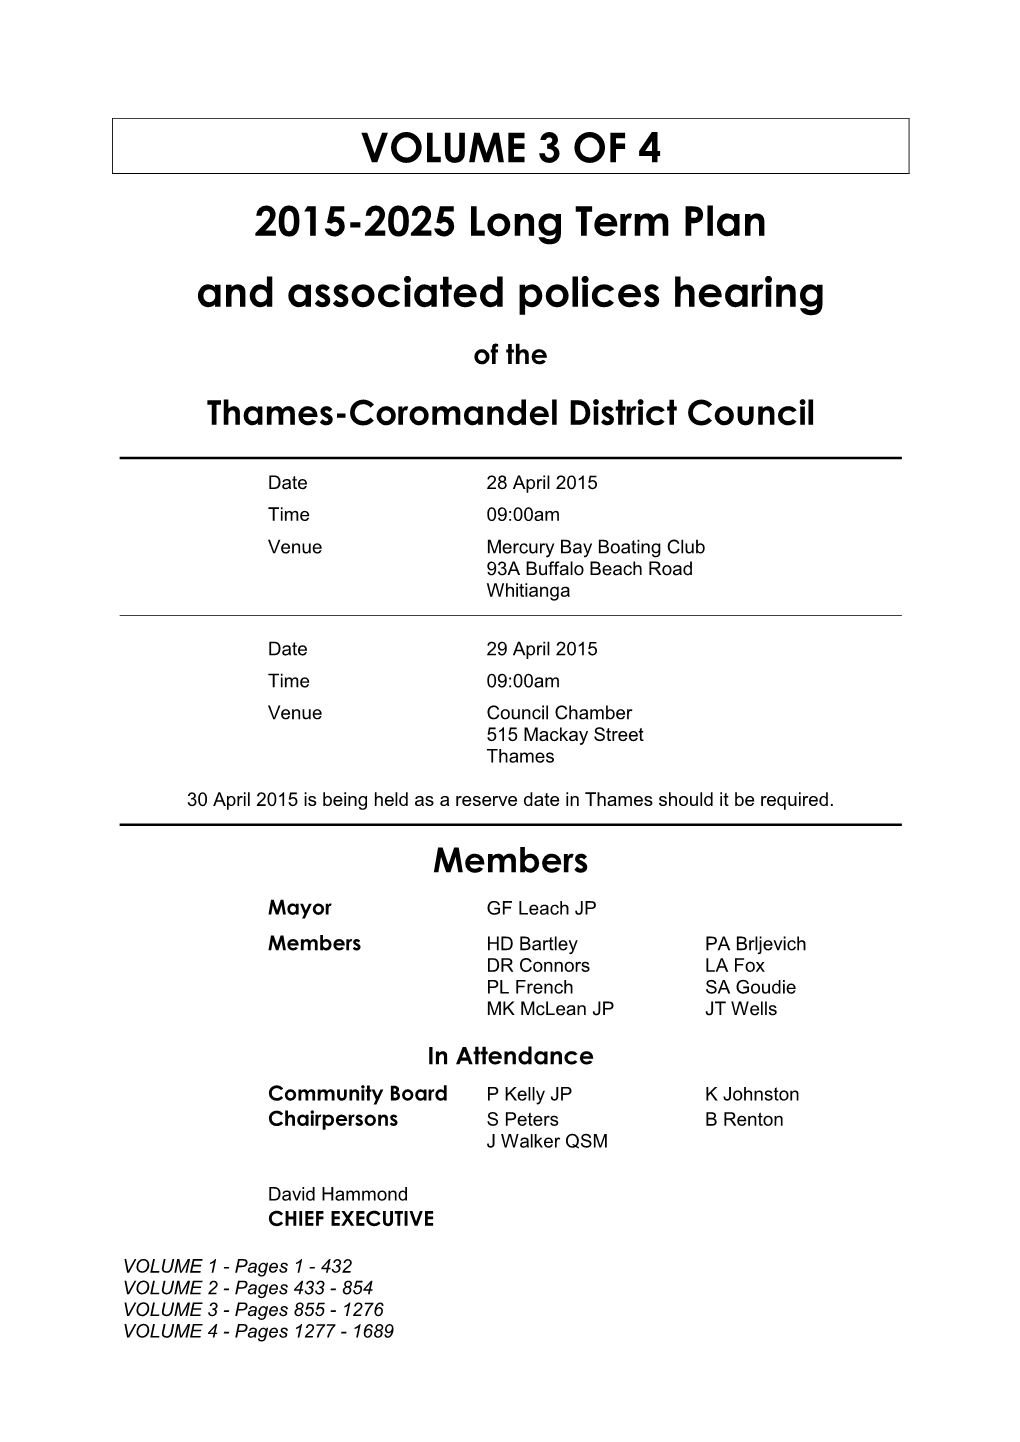 VOLUME 3 of 4 2015-2025 Long Term Plan and Associated Polices Hearing of the Thames-Coromandel District Council